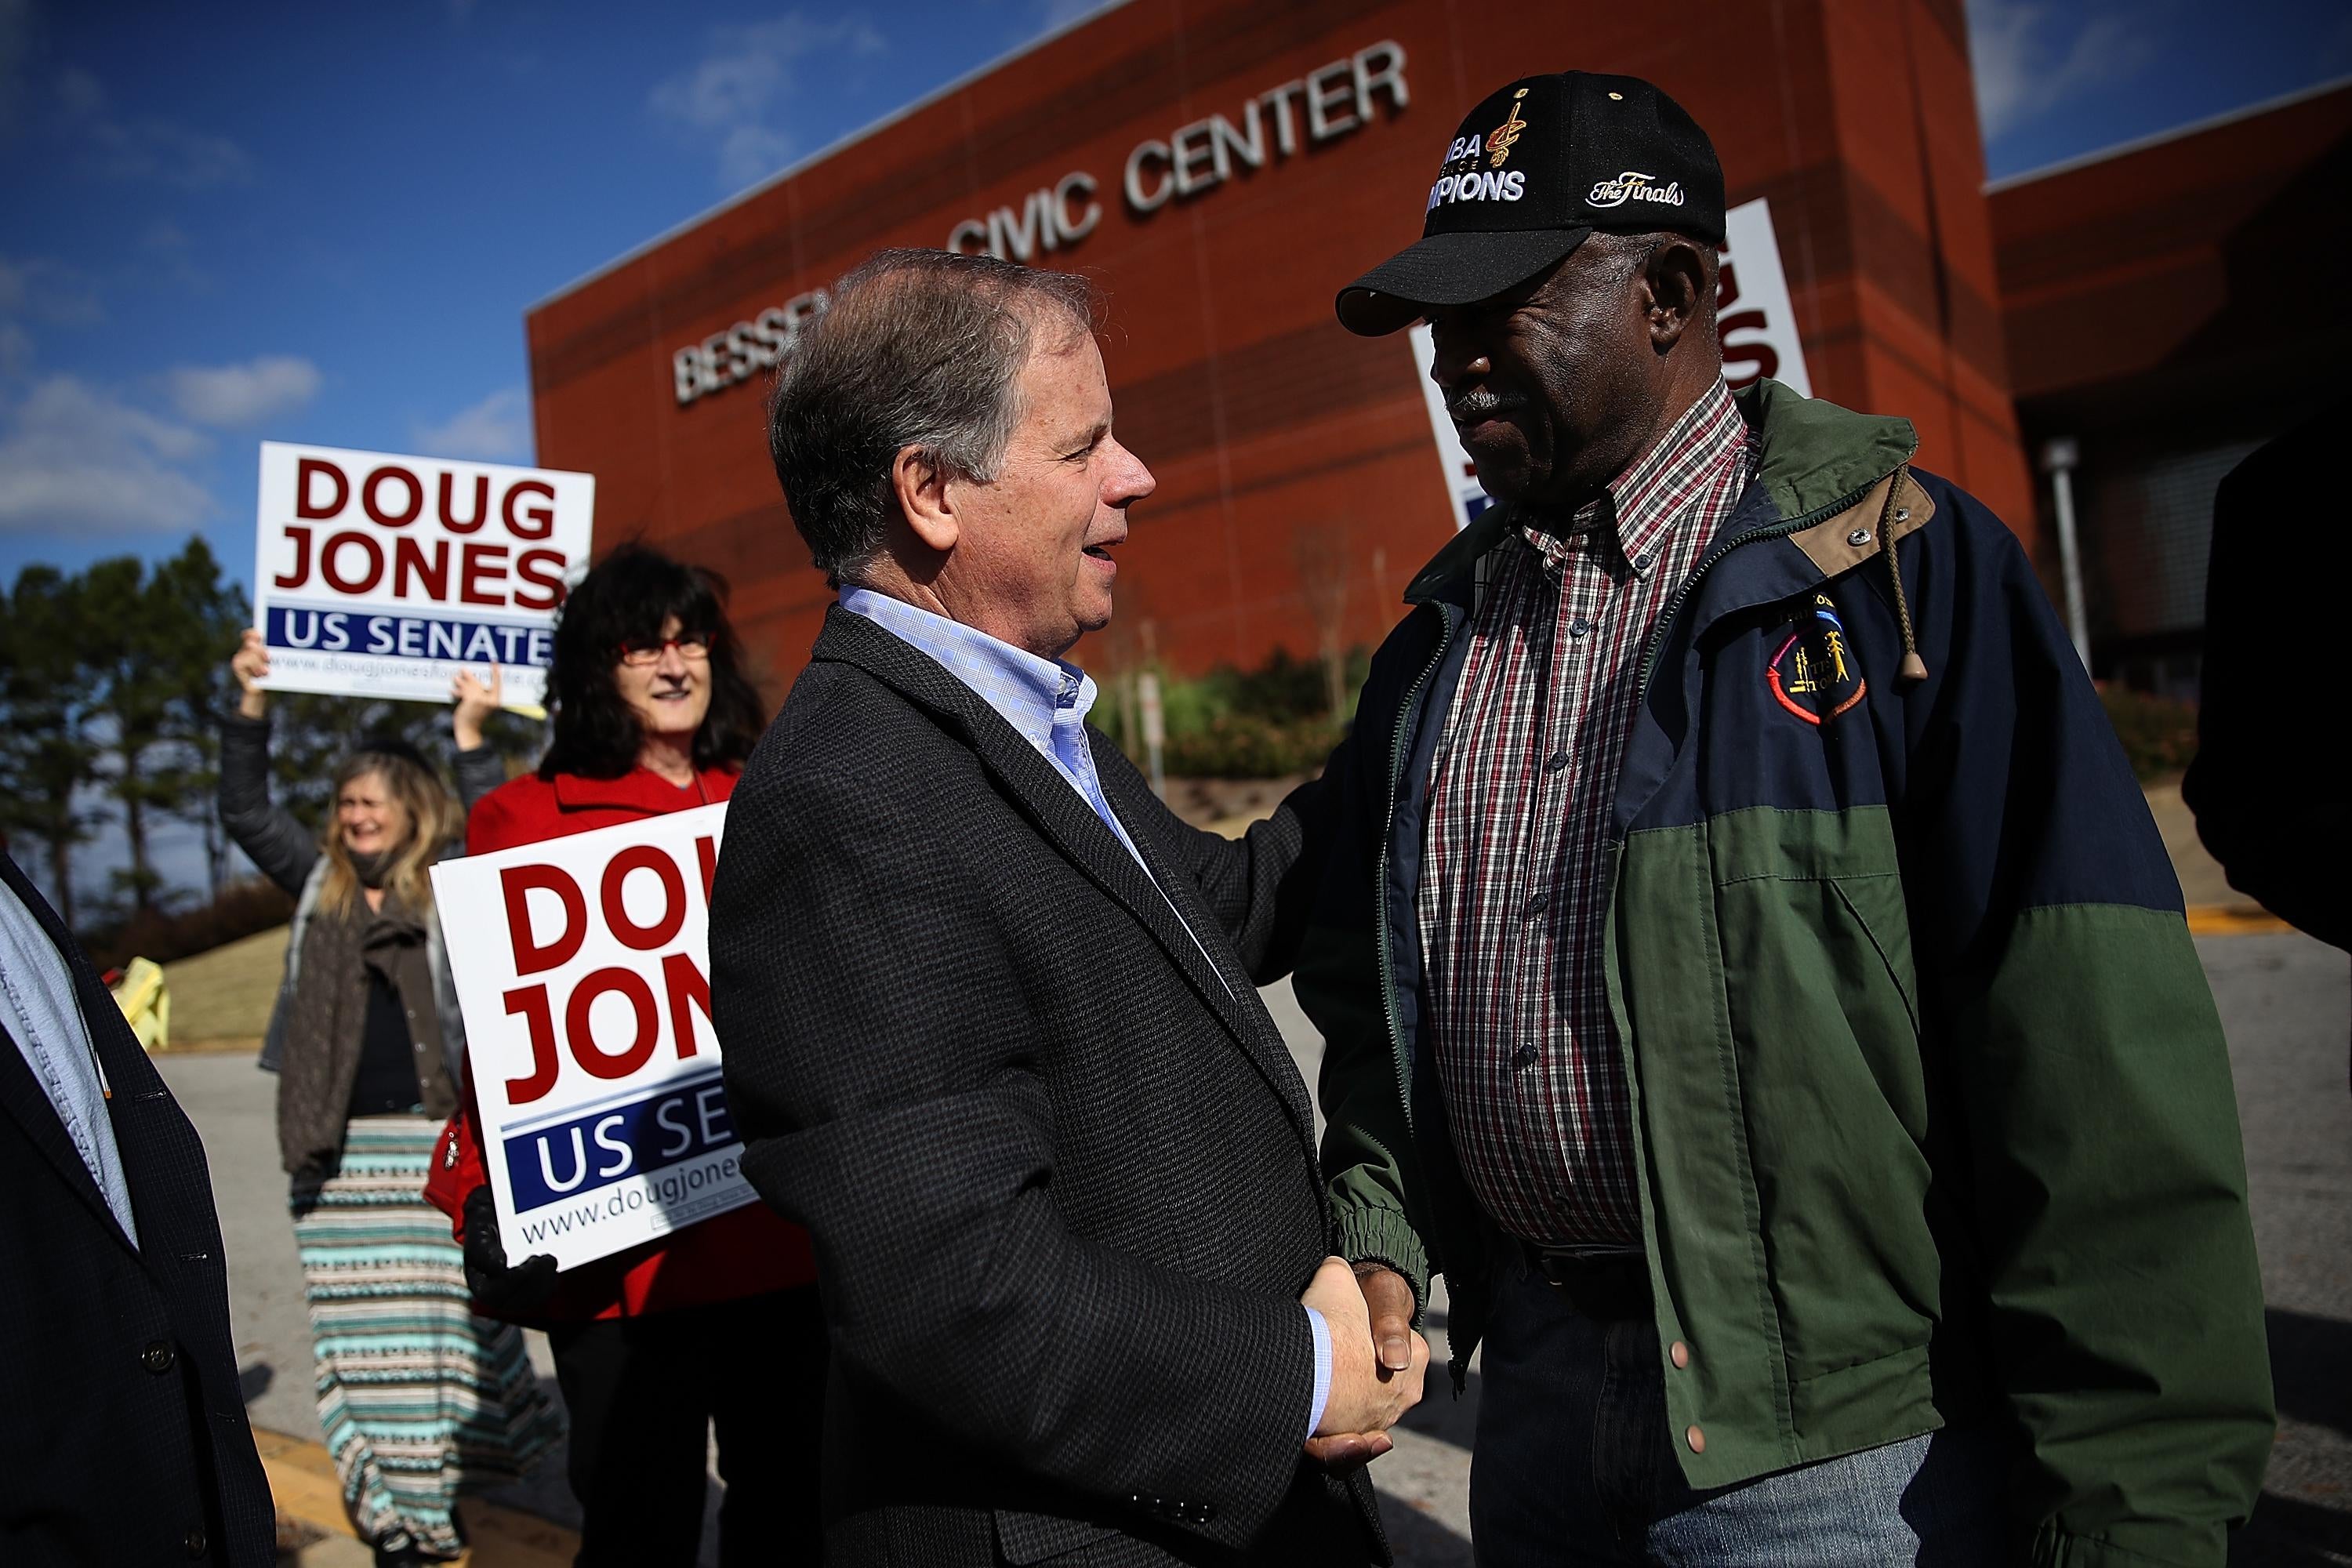 BESSEMER, AL - DECEMBER 12:  Democratic Senatorial candidate Doug Jones (L) greets voters outside of a polling station at the Bessemer Civic Center on December 12, 2017 in Bessemer, Alabama. Doug Jones is facing off against Republican Roy Moore in a special election for U.S. Senate.  (Photo by Justin Sullivan/Getty Images)